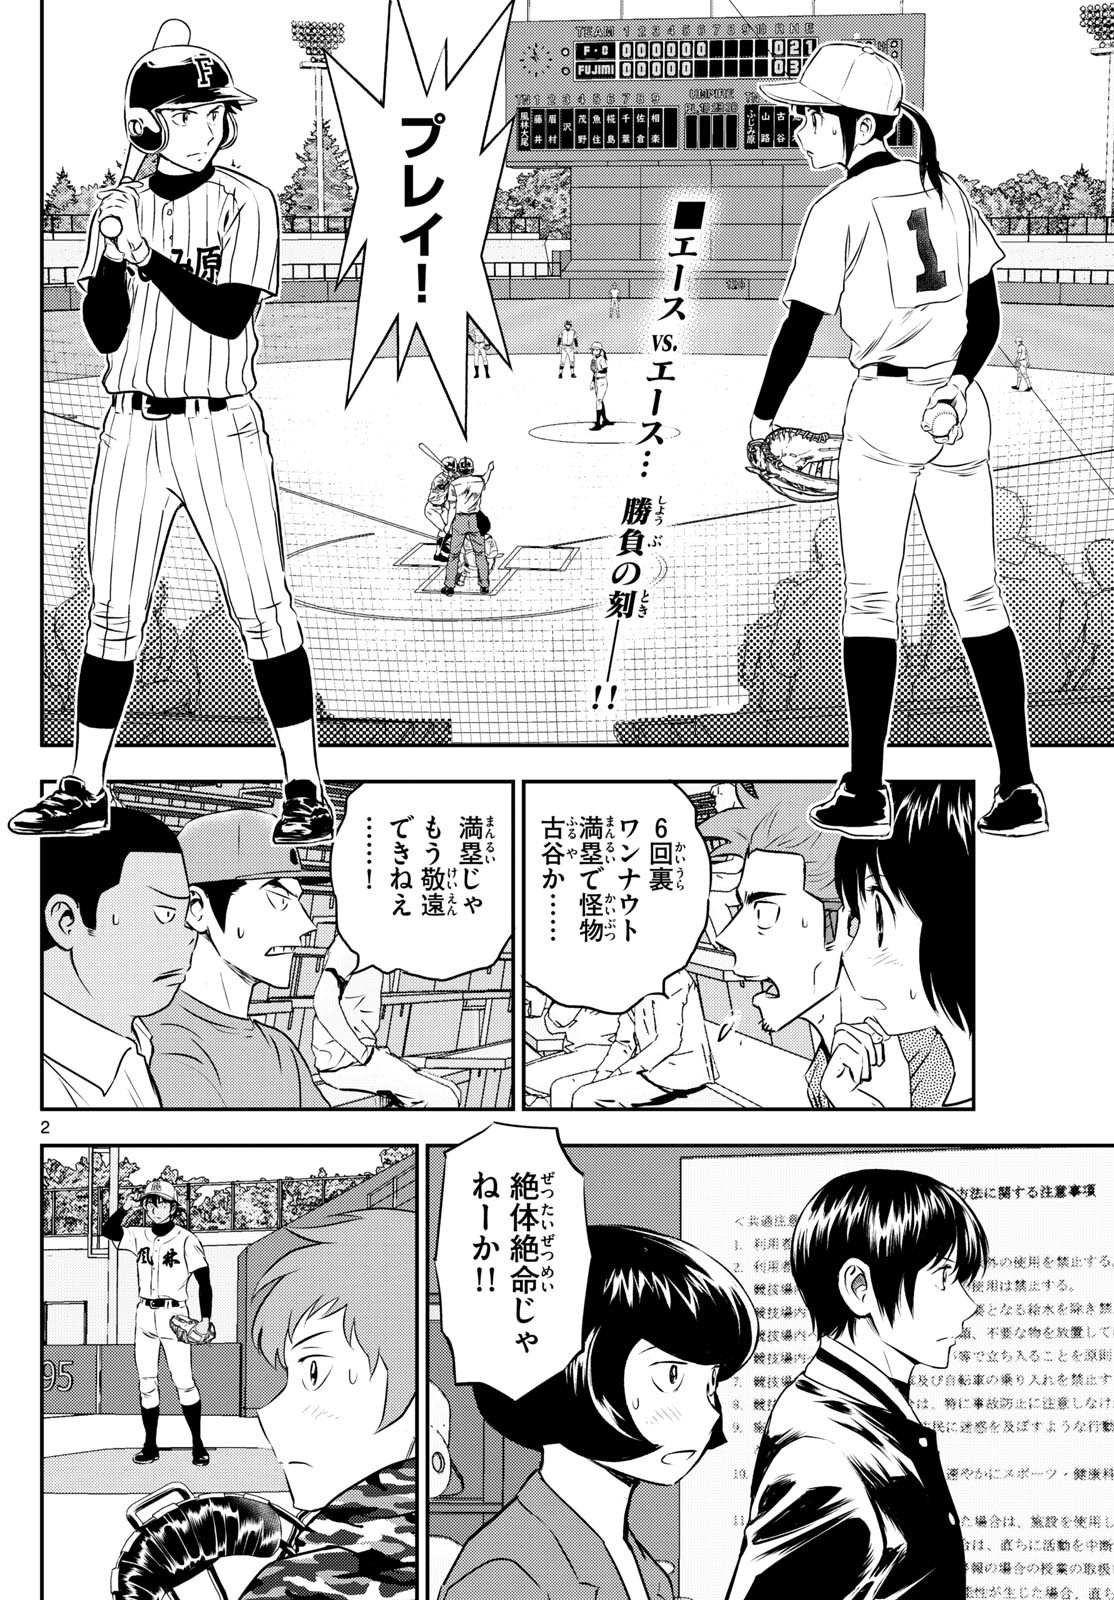 Major 2nd - メジャーセカンド - Chapter 273 - Page 2